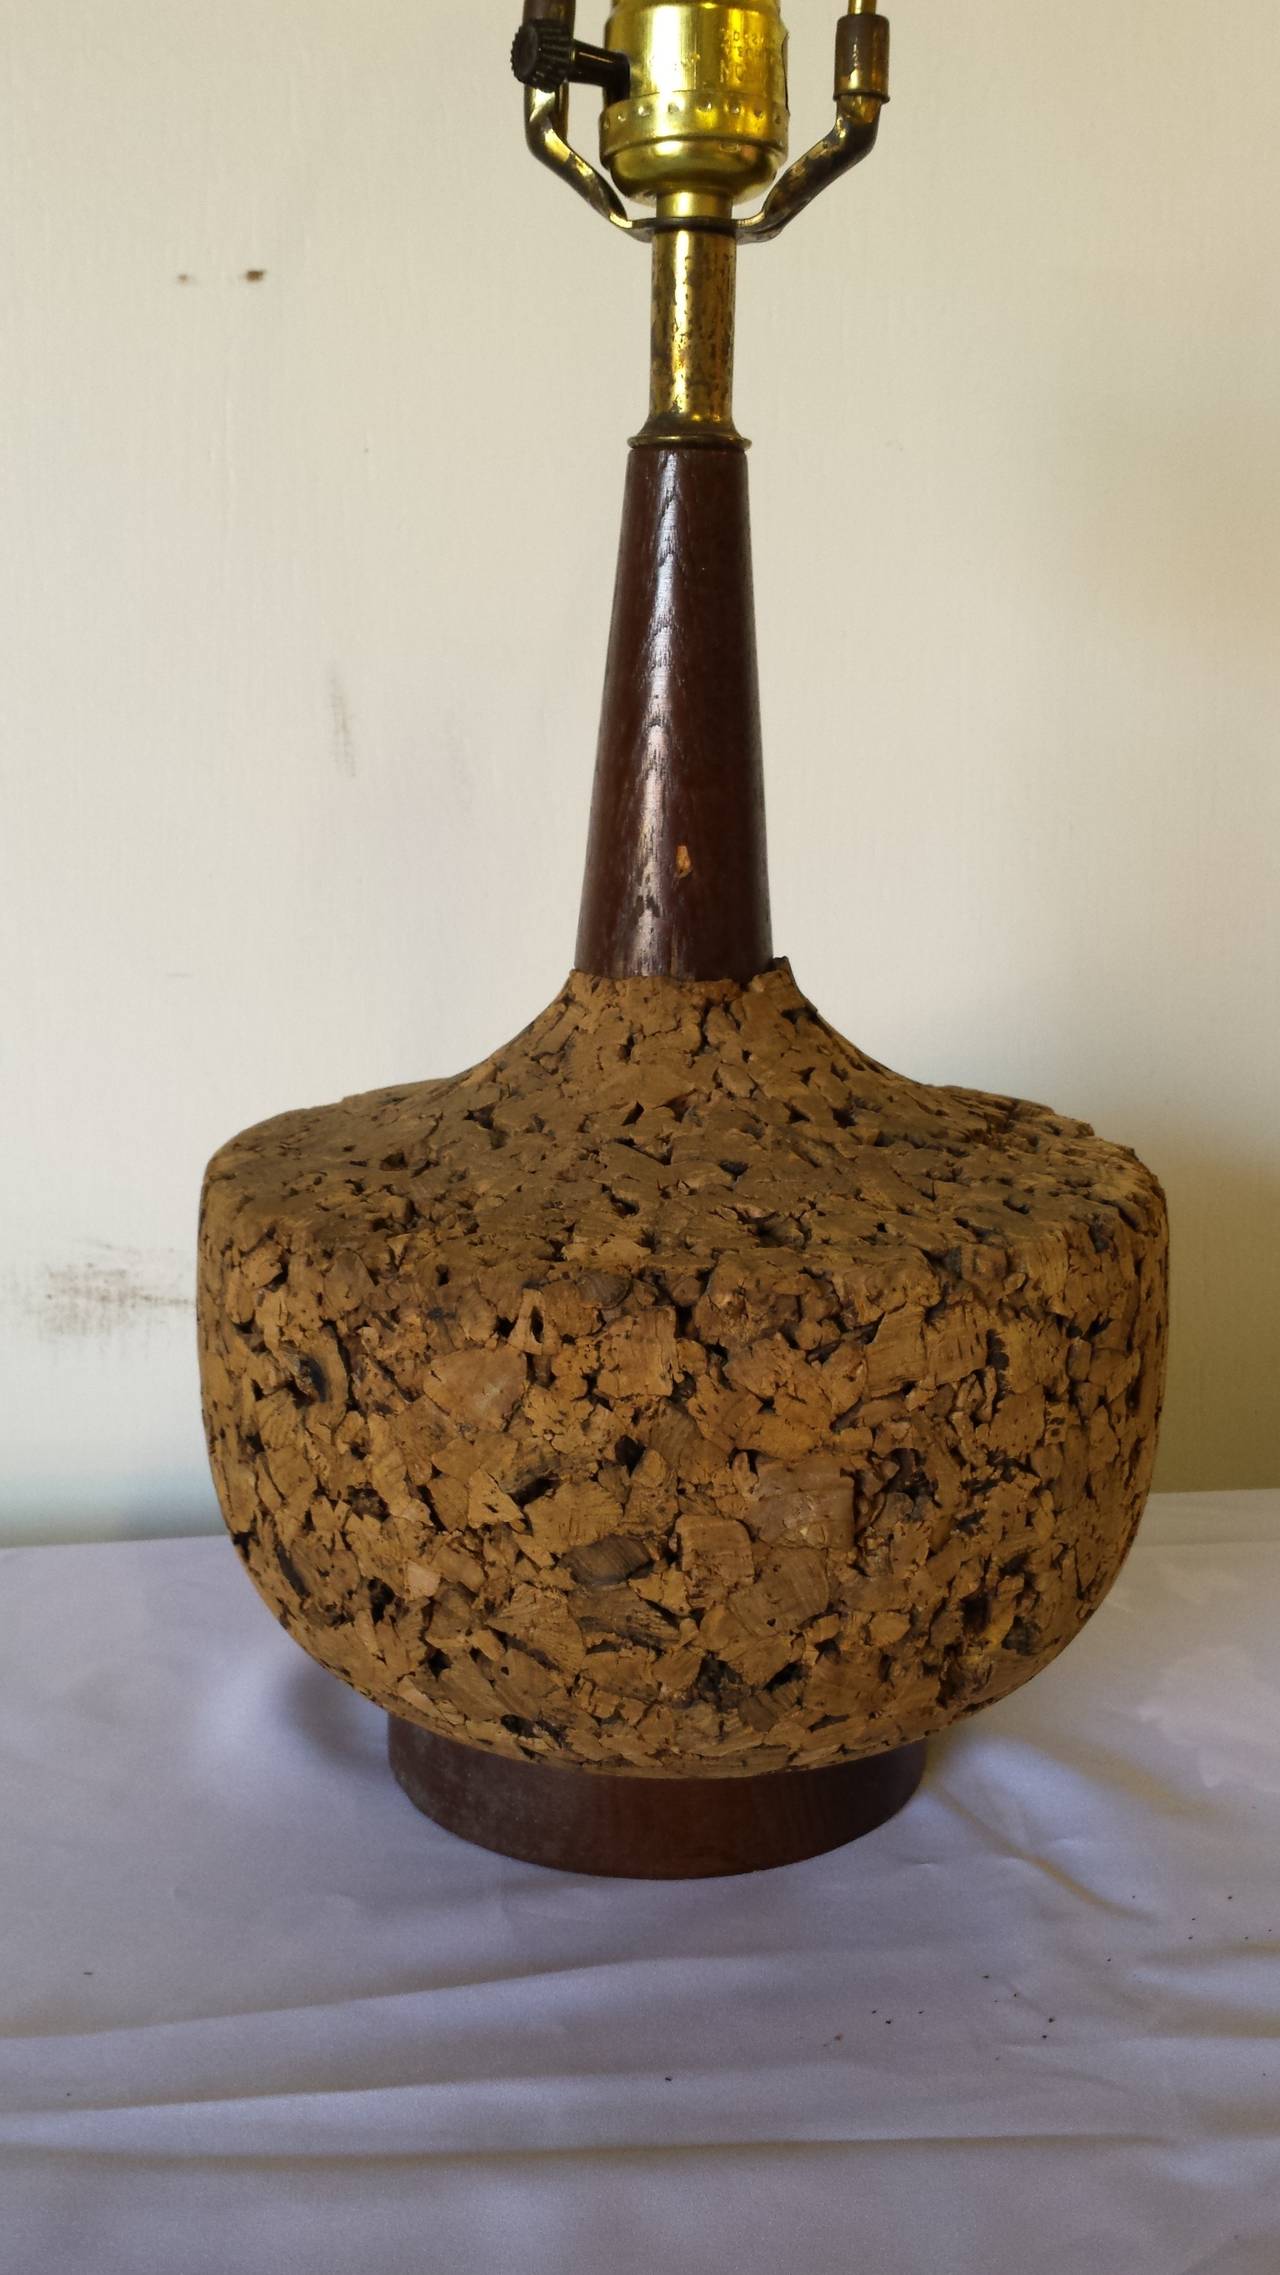 Midcentury Danish Cork Lamp In Excellent Condition For Sale In Glendale, CA